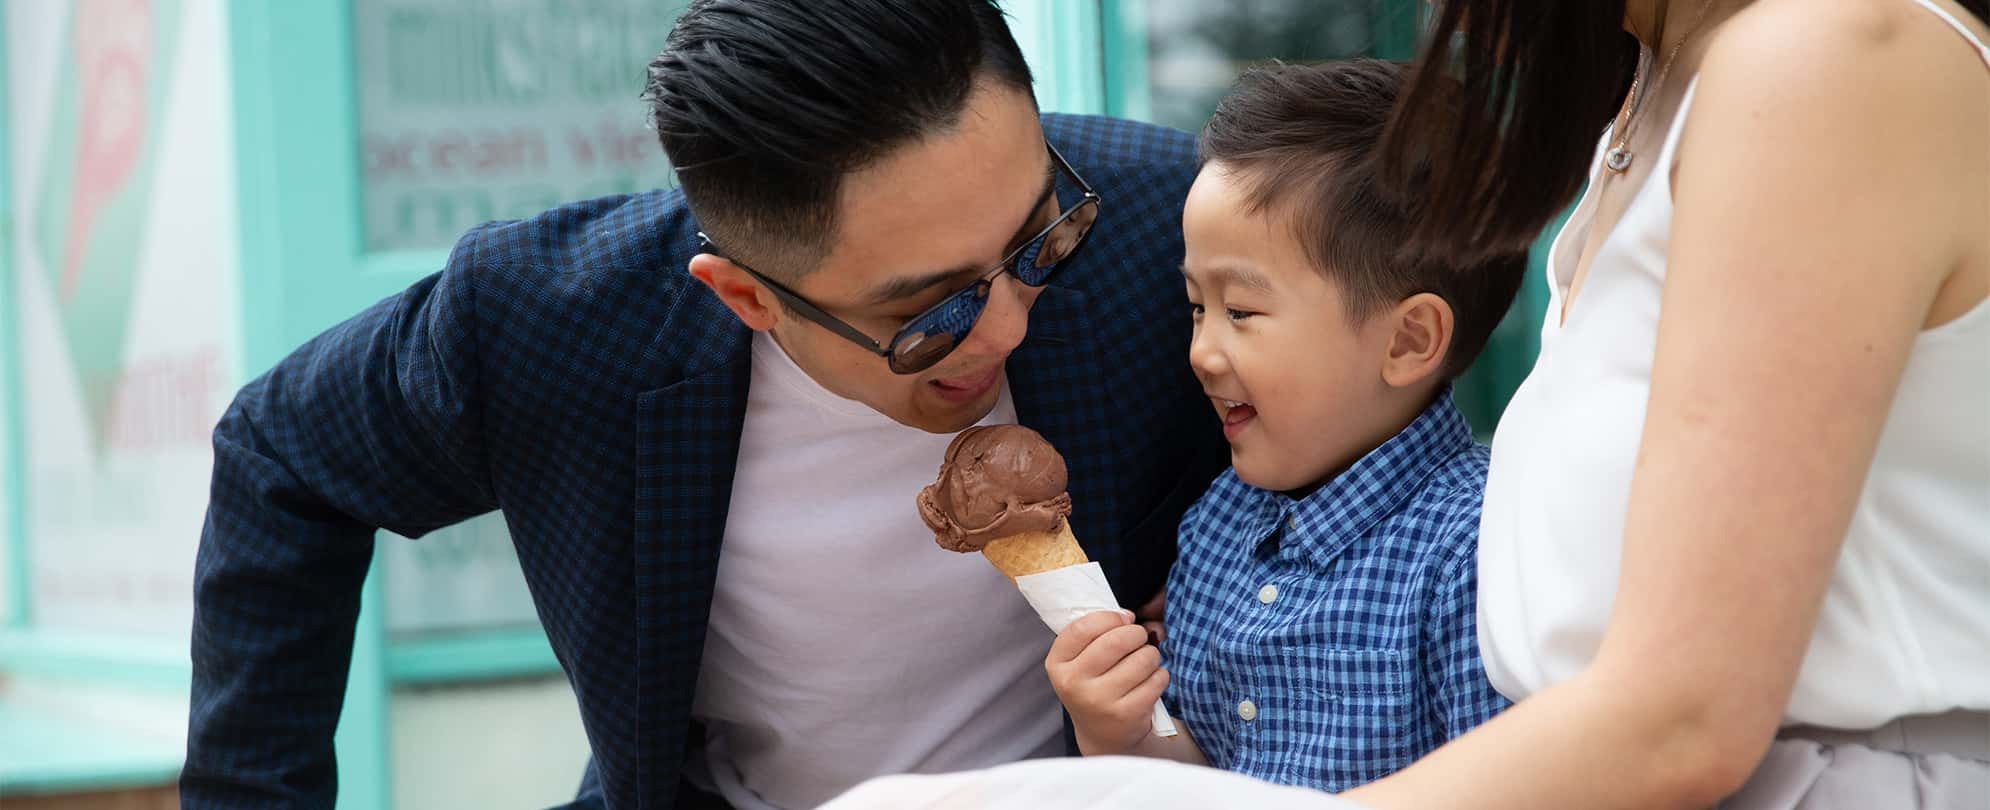 Young boy holding chocolate ice cream cone sits between mom and dad as the dad leans in to take a big bite of ice cream.